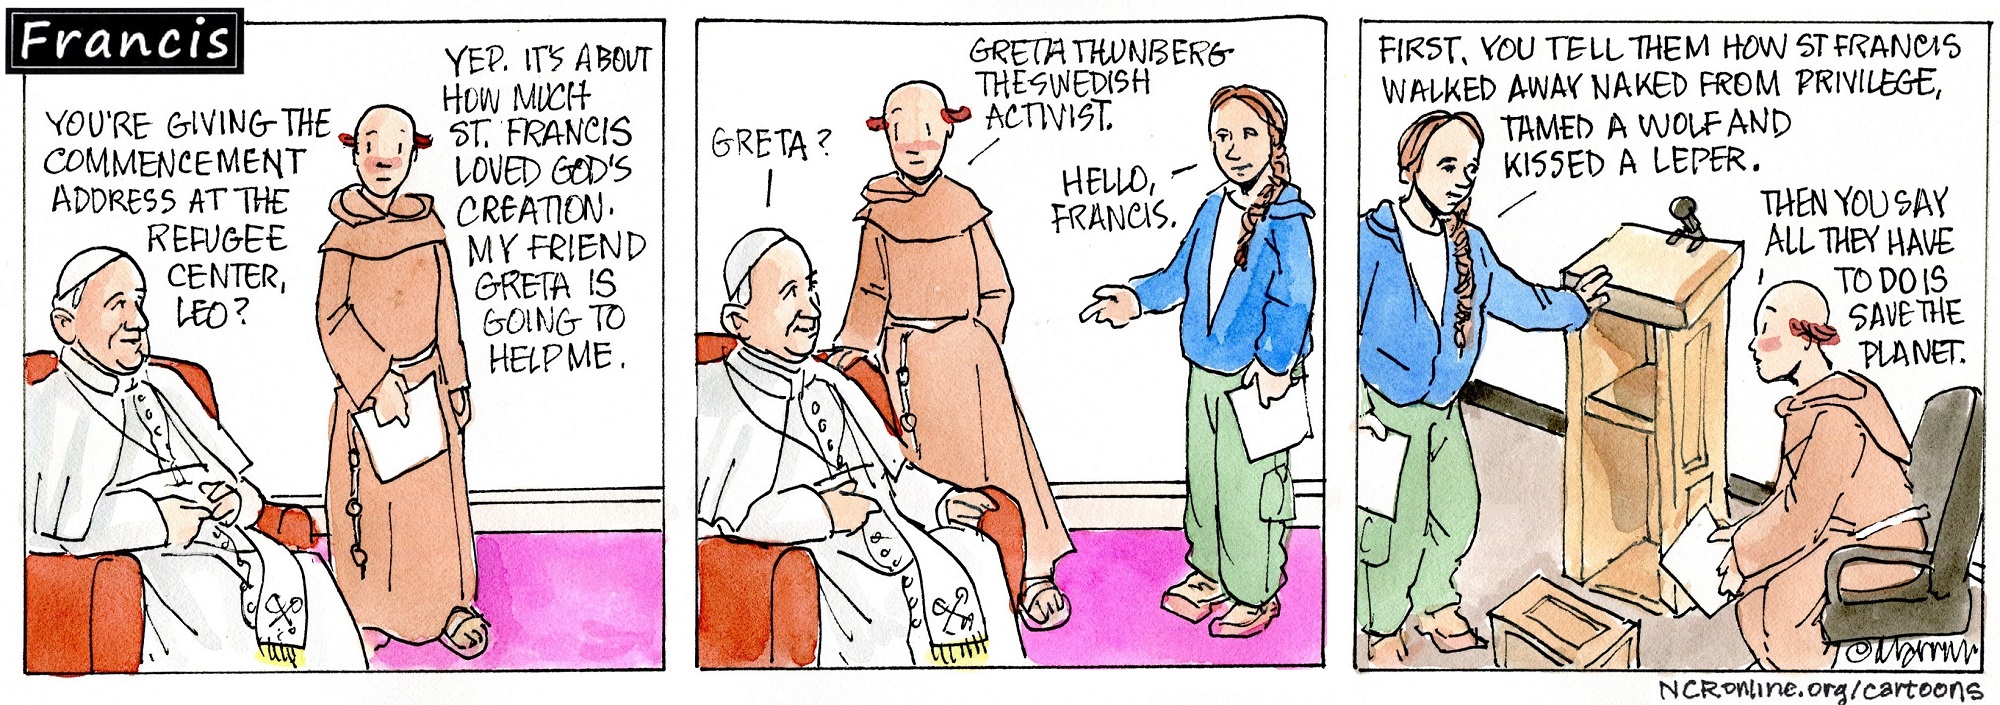 Francis, the comic strip: Greta helps Brother Leo with his commencement address. 